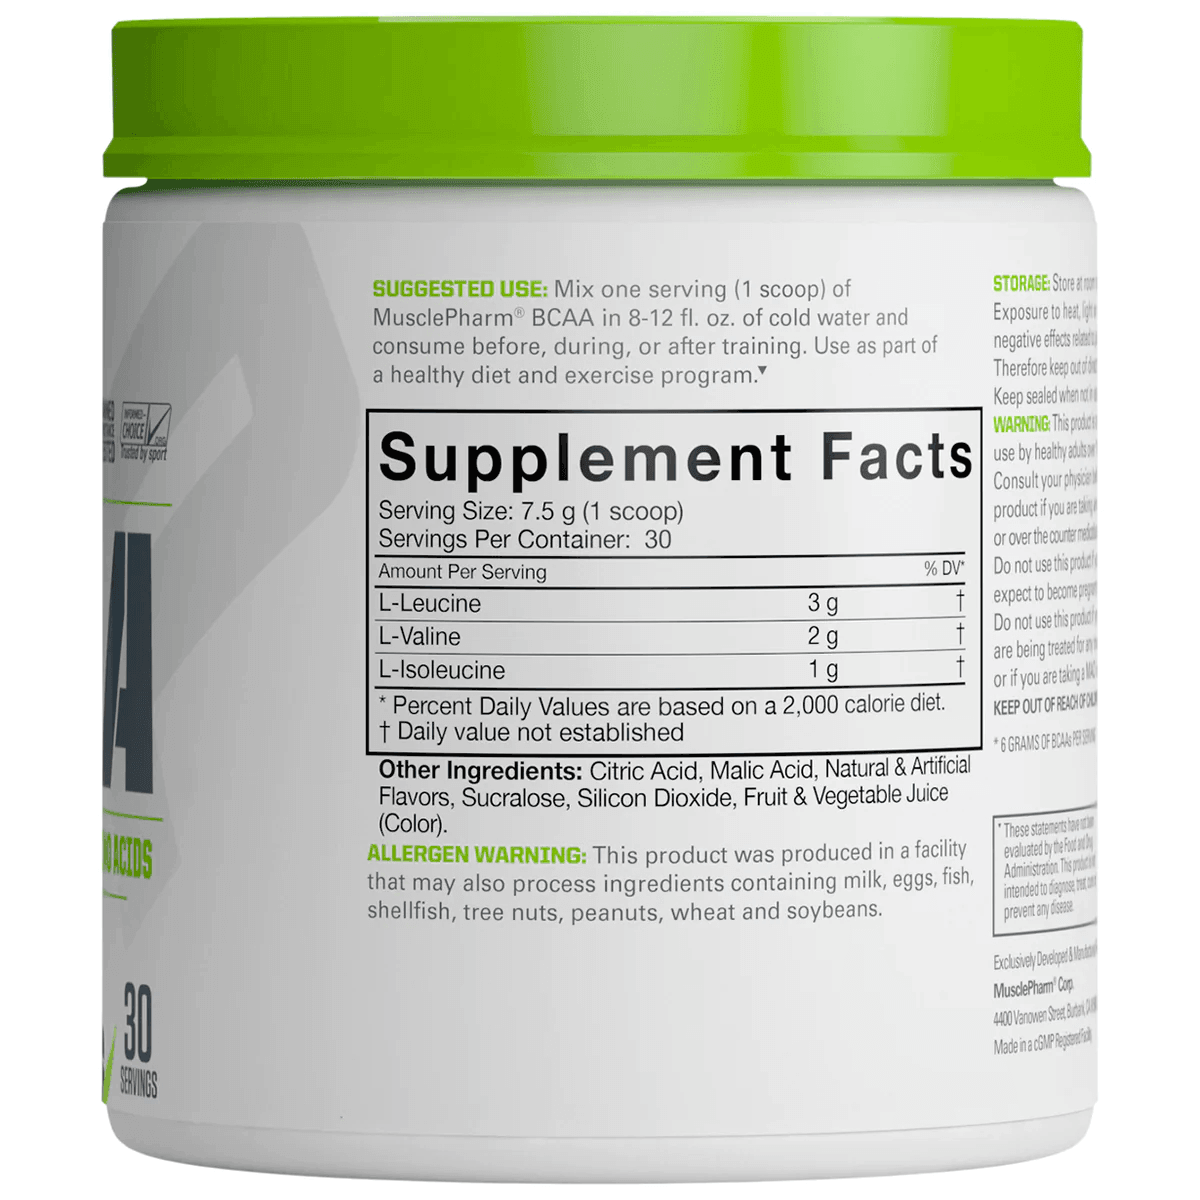 MP BCAA - The Supplements Factory